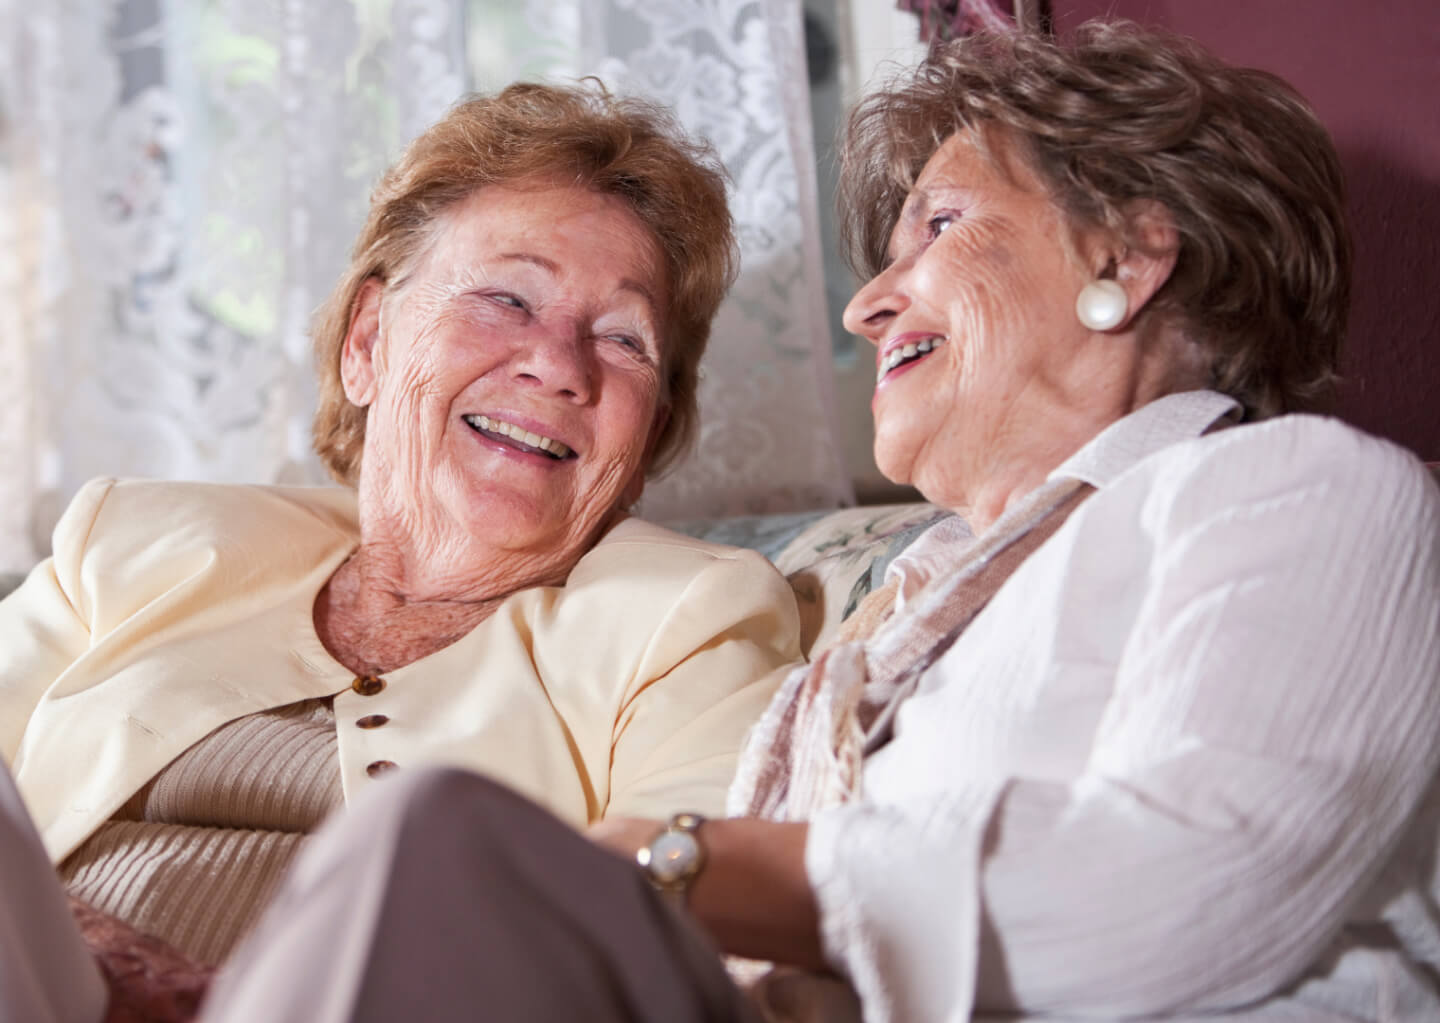 Building Relationships in Retirement: 4 Benefits of Having a Roommate